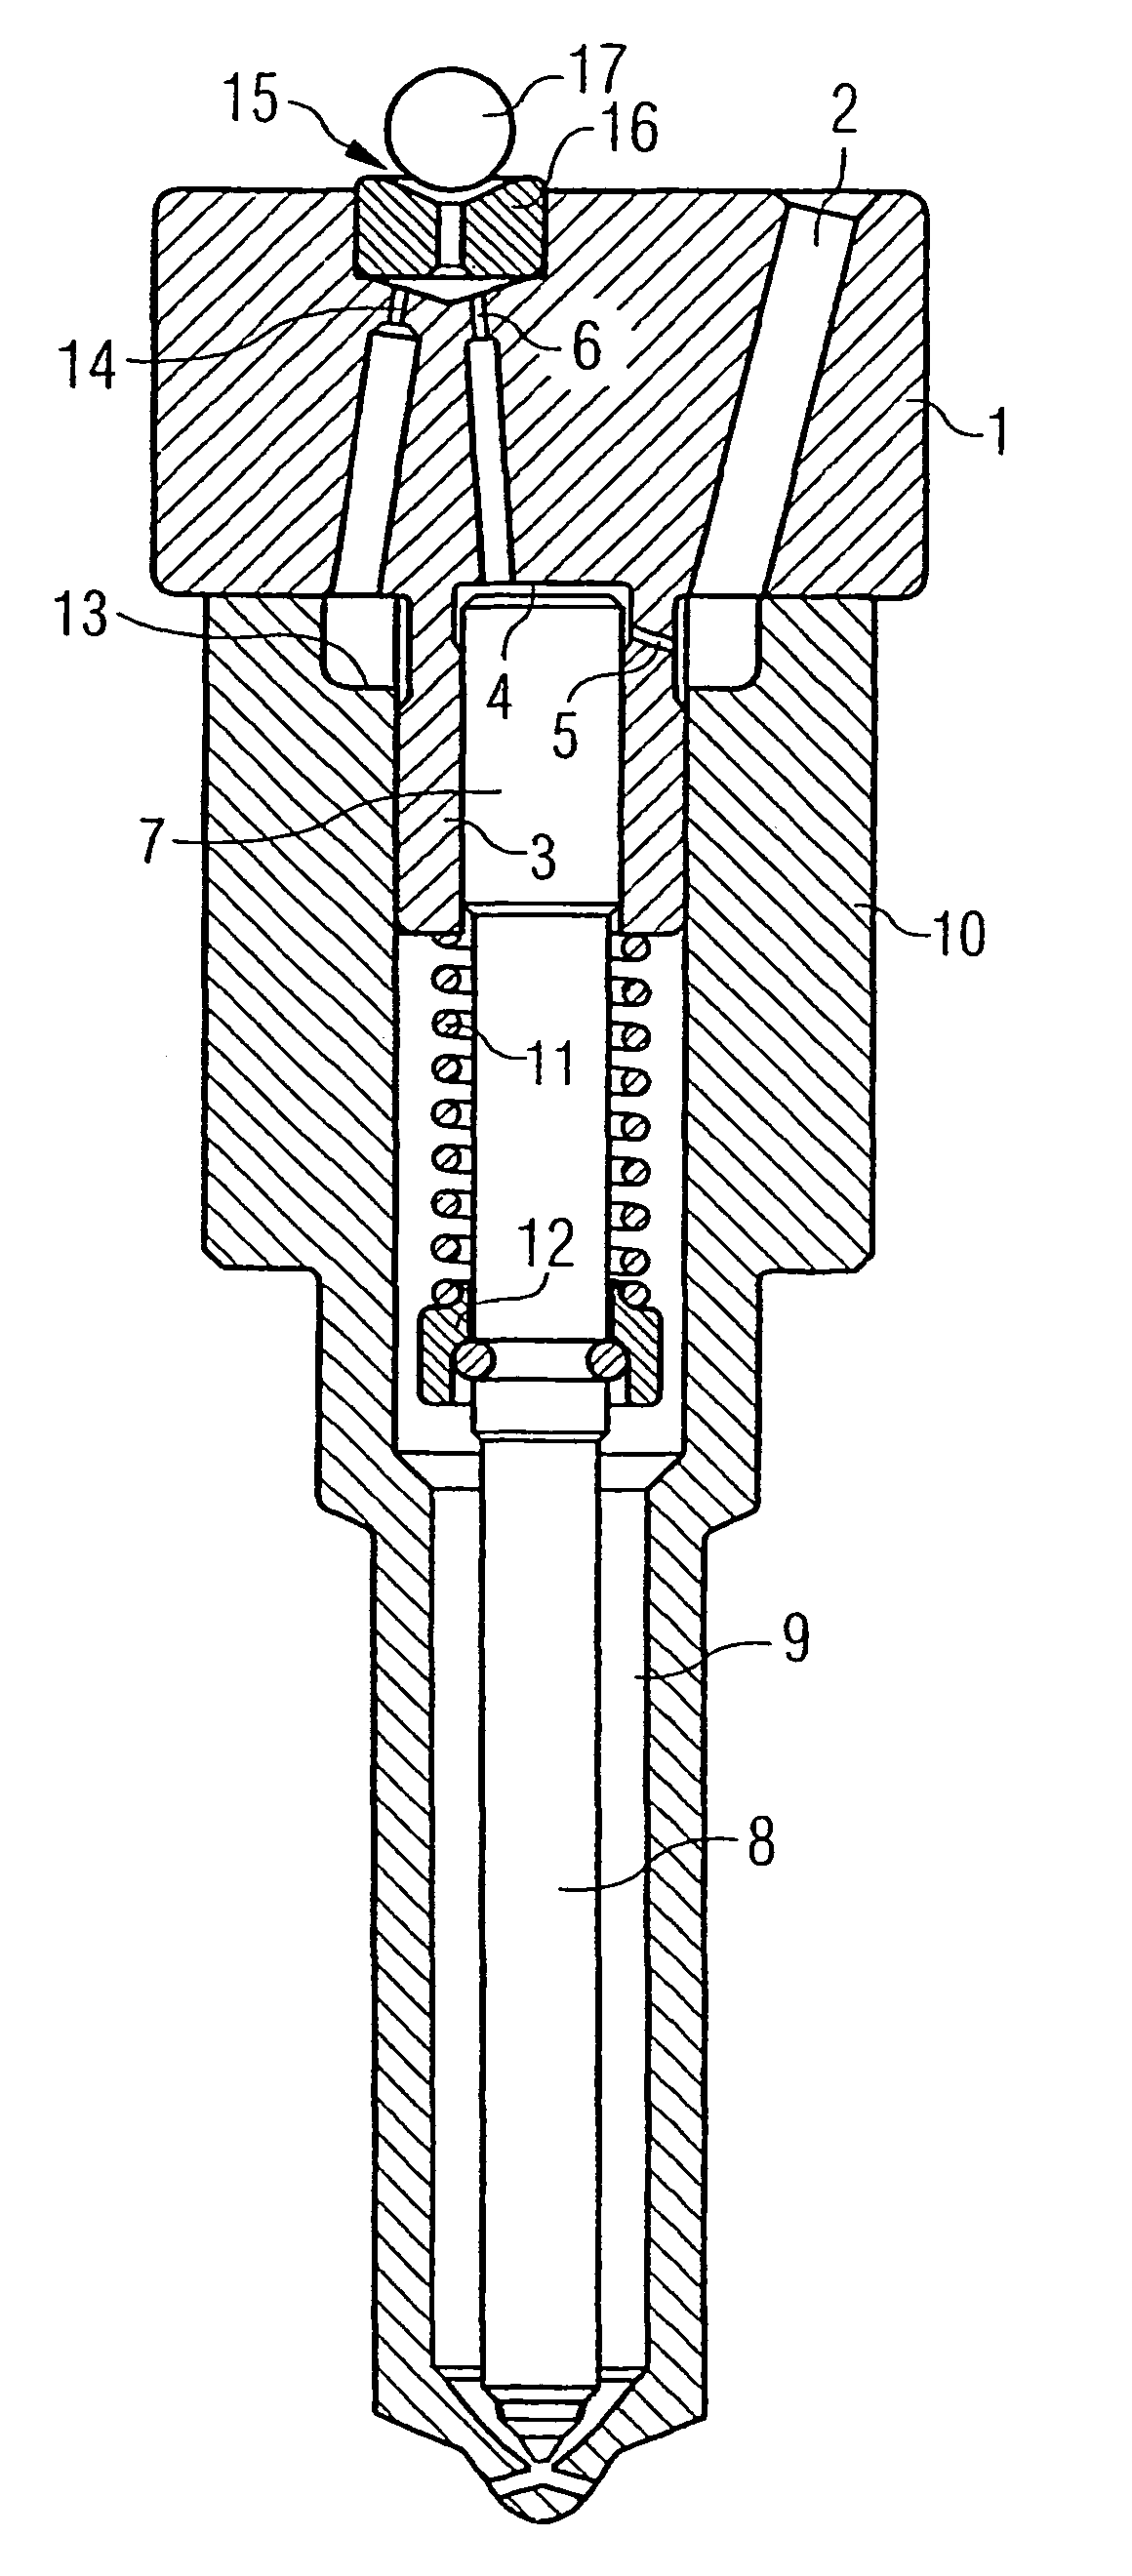 Control module for an injector of an accumulator injection system